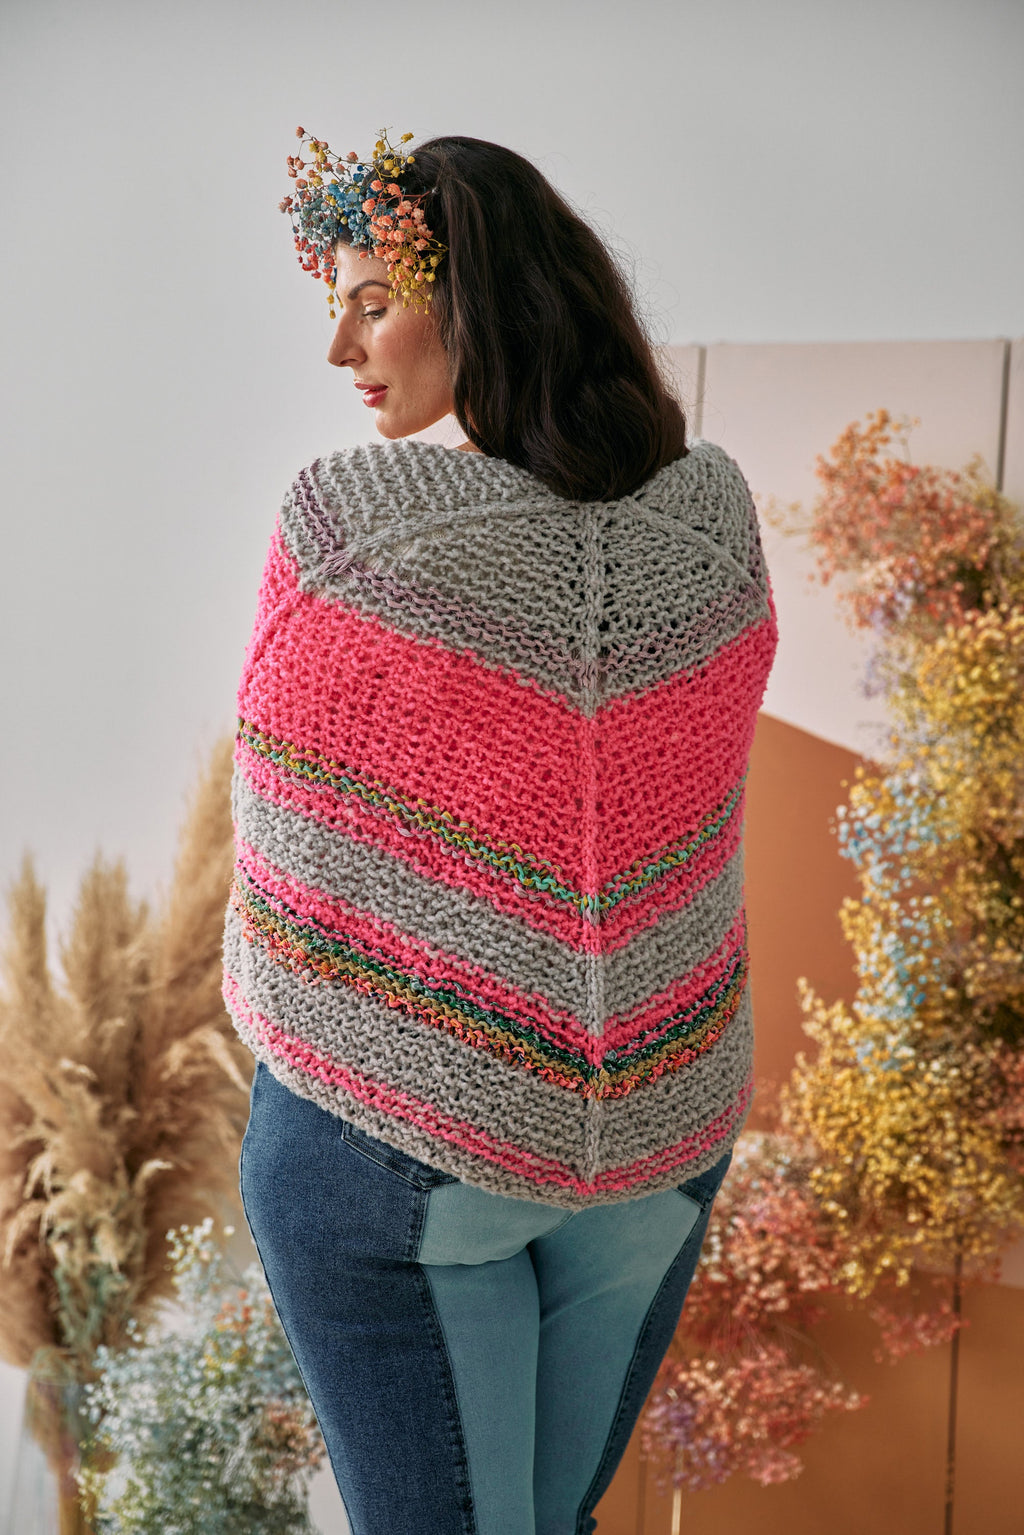 Backview of the shawl